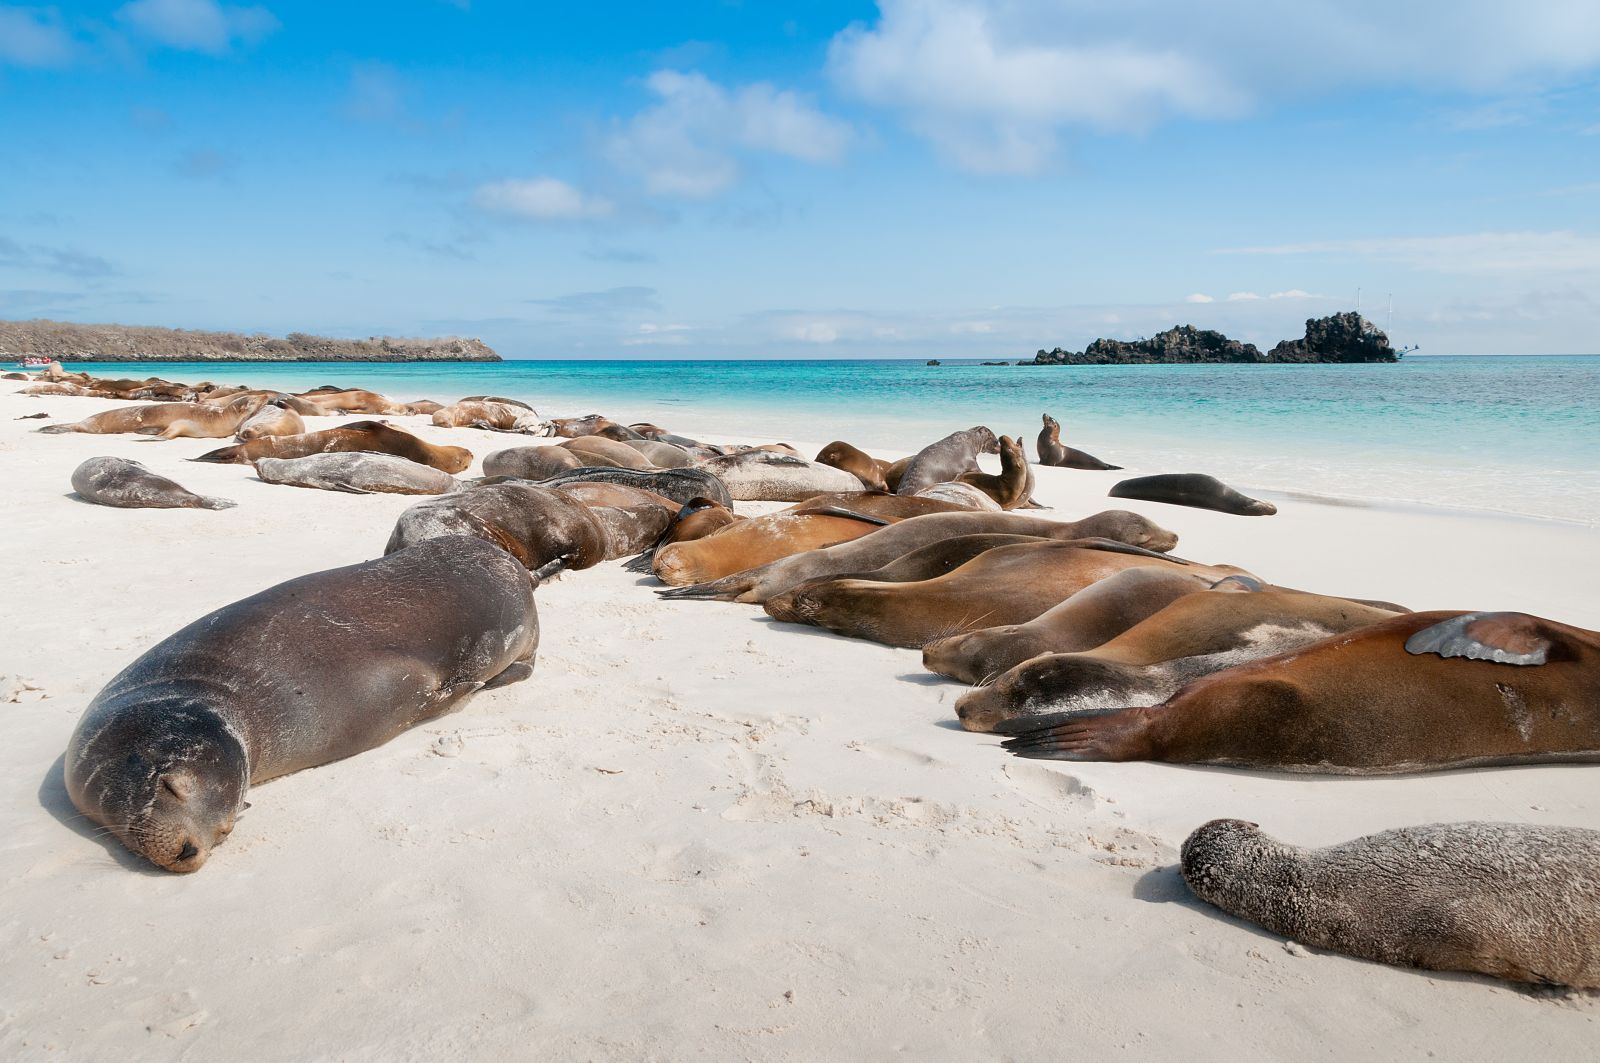 See Sea lions basking on the beach on a luxury holiday to the Galapagos Islands